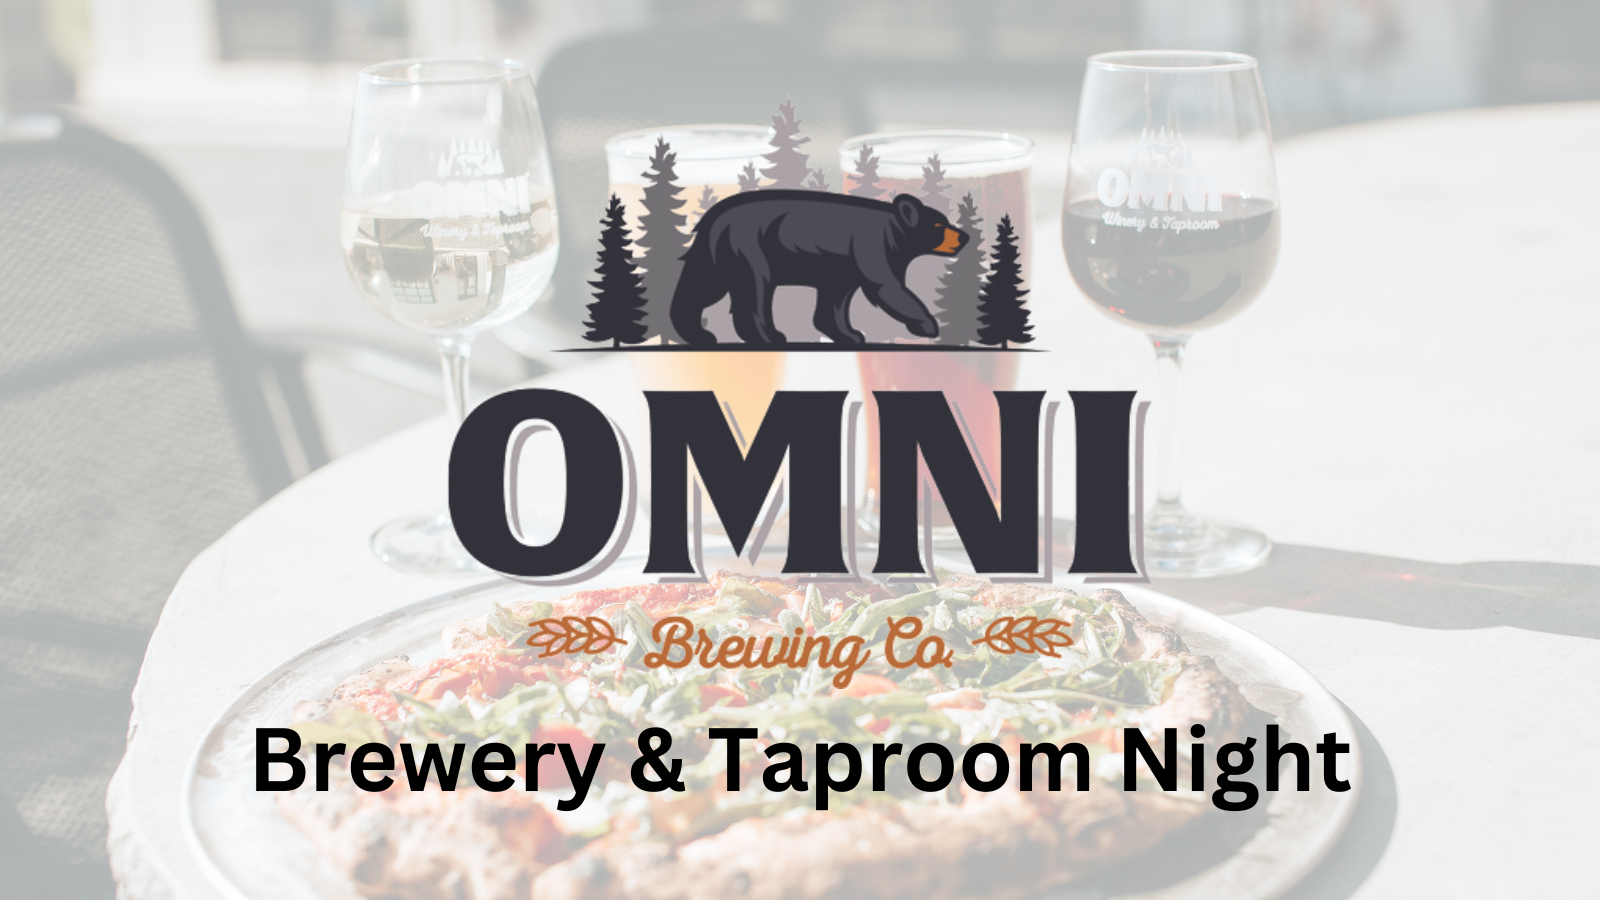 OMNI Brewery & Taproom Night for CROSS Services